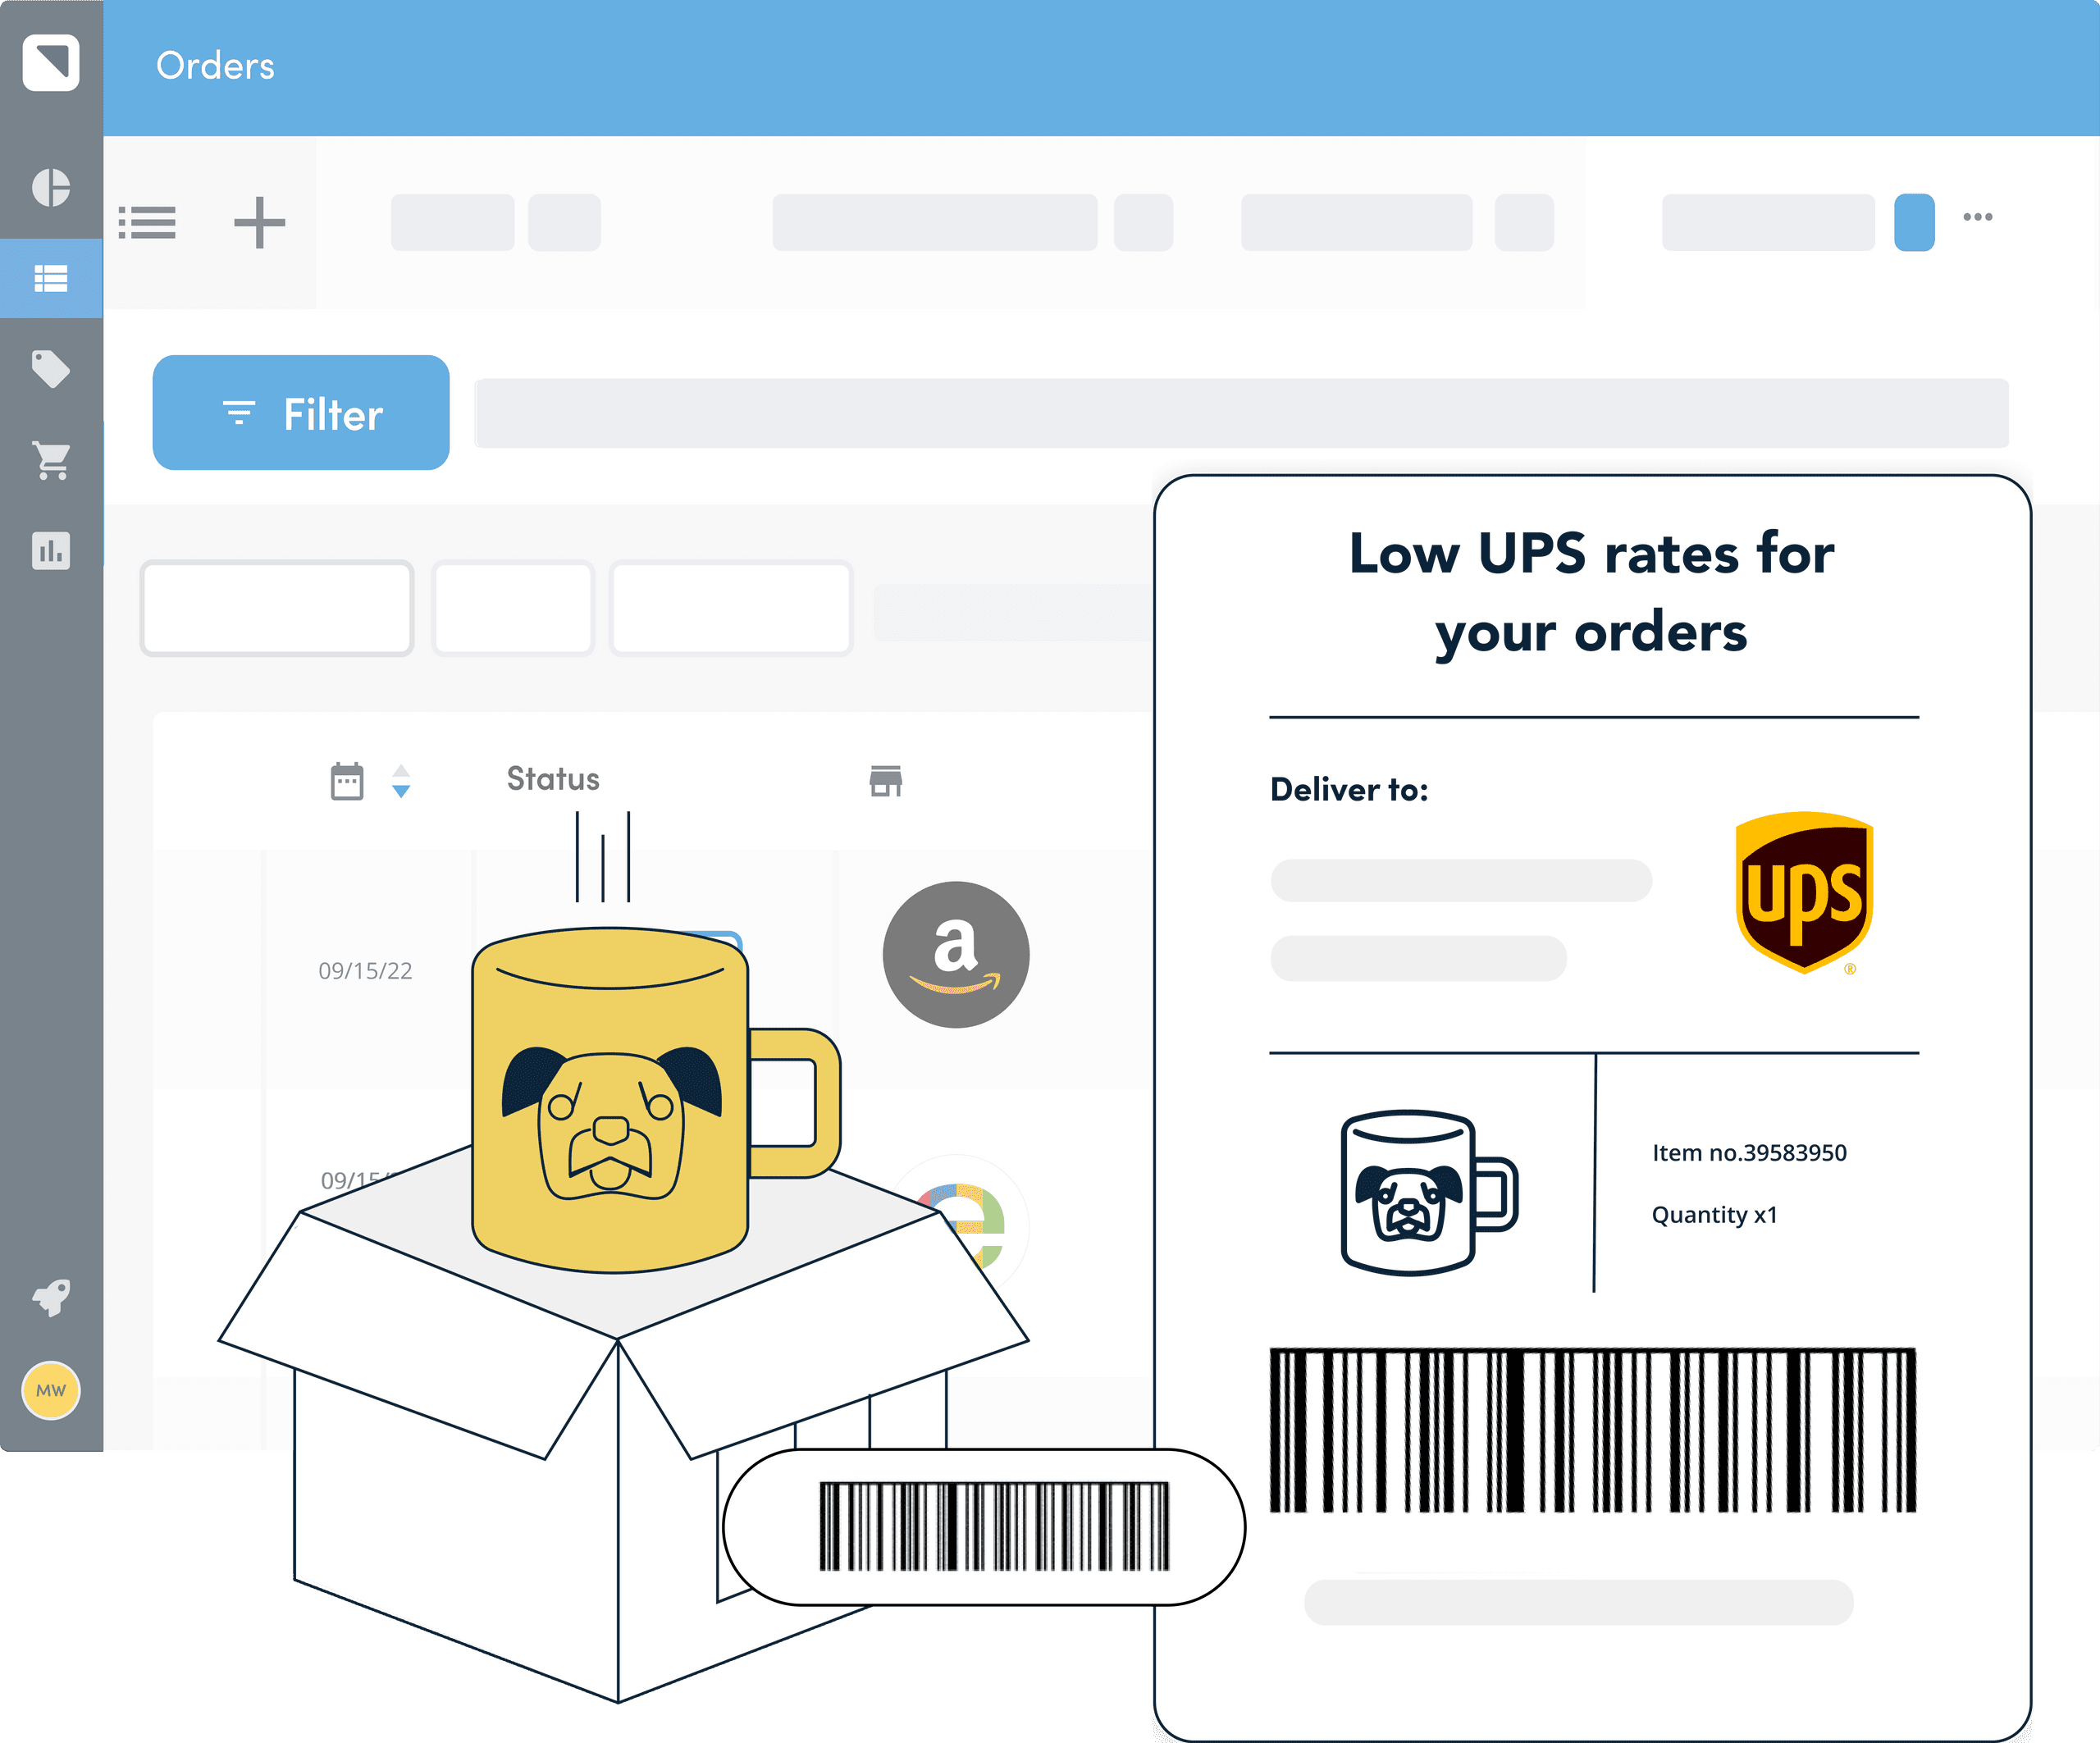 Immediate access to UPS discounted rates